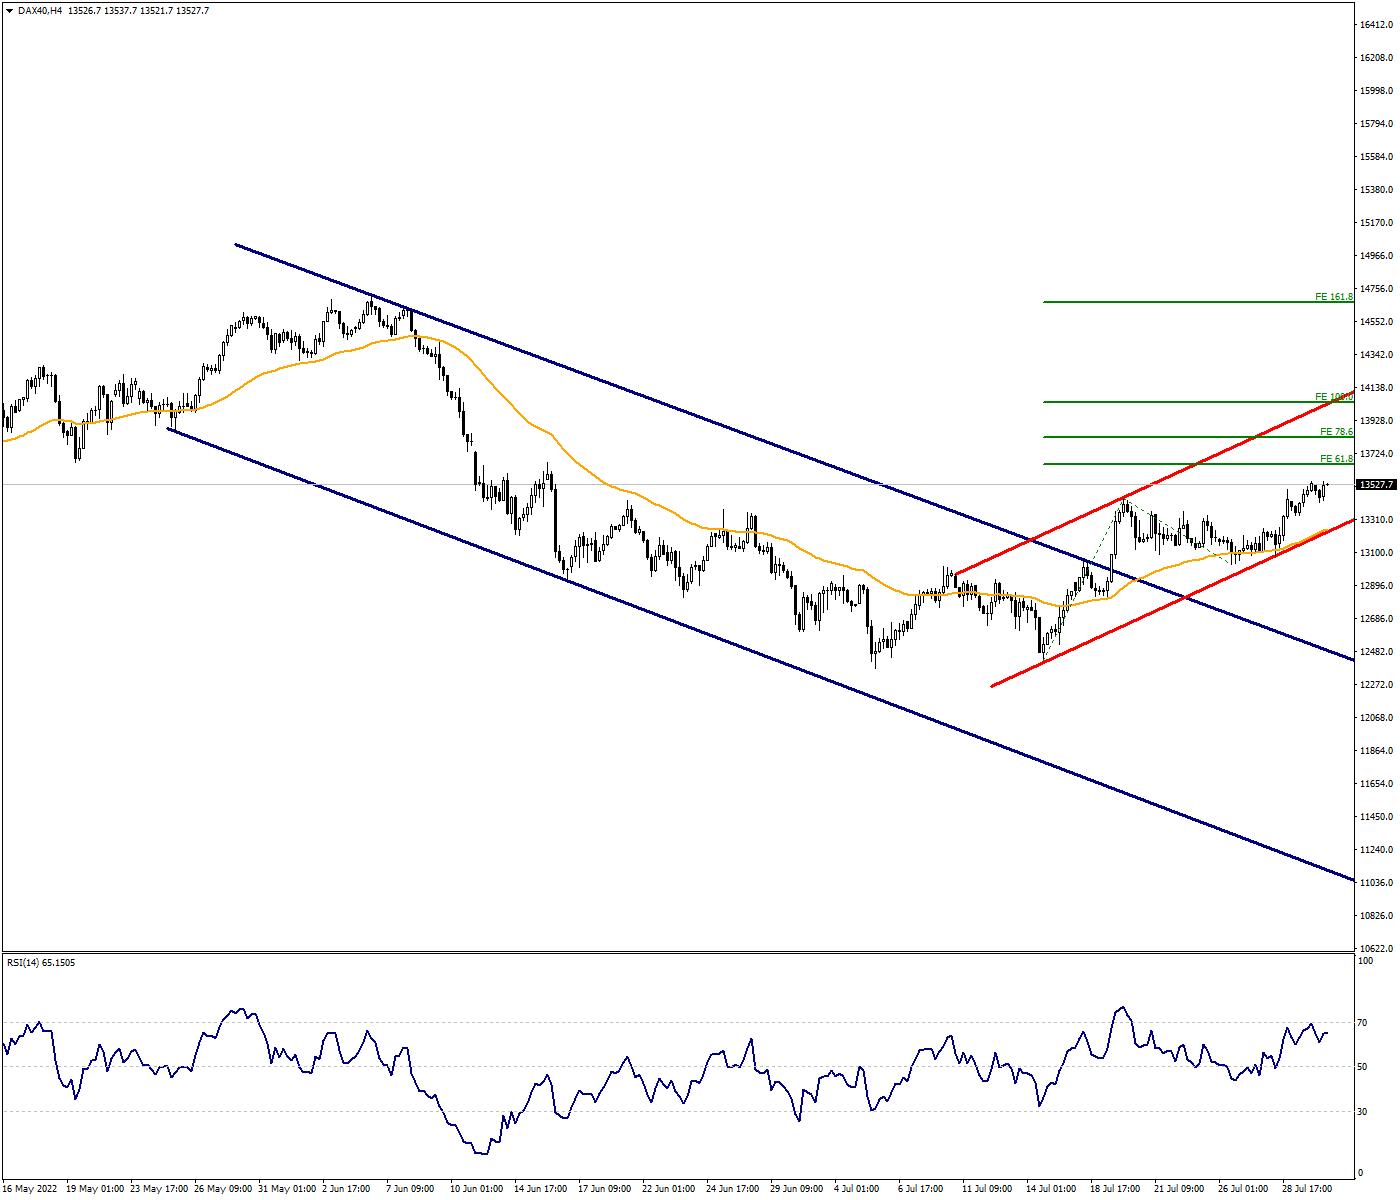 DAX40:The Upward Movements May Continue in Index